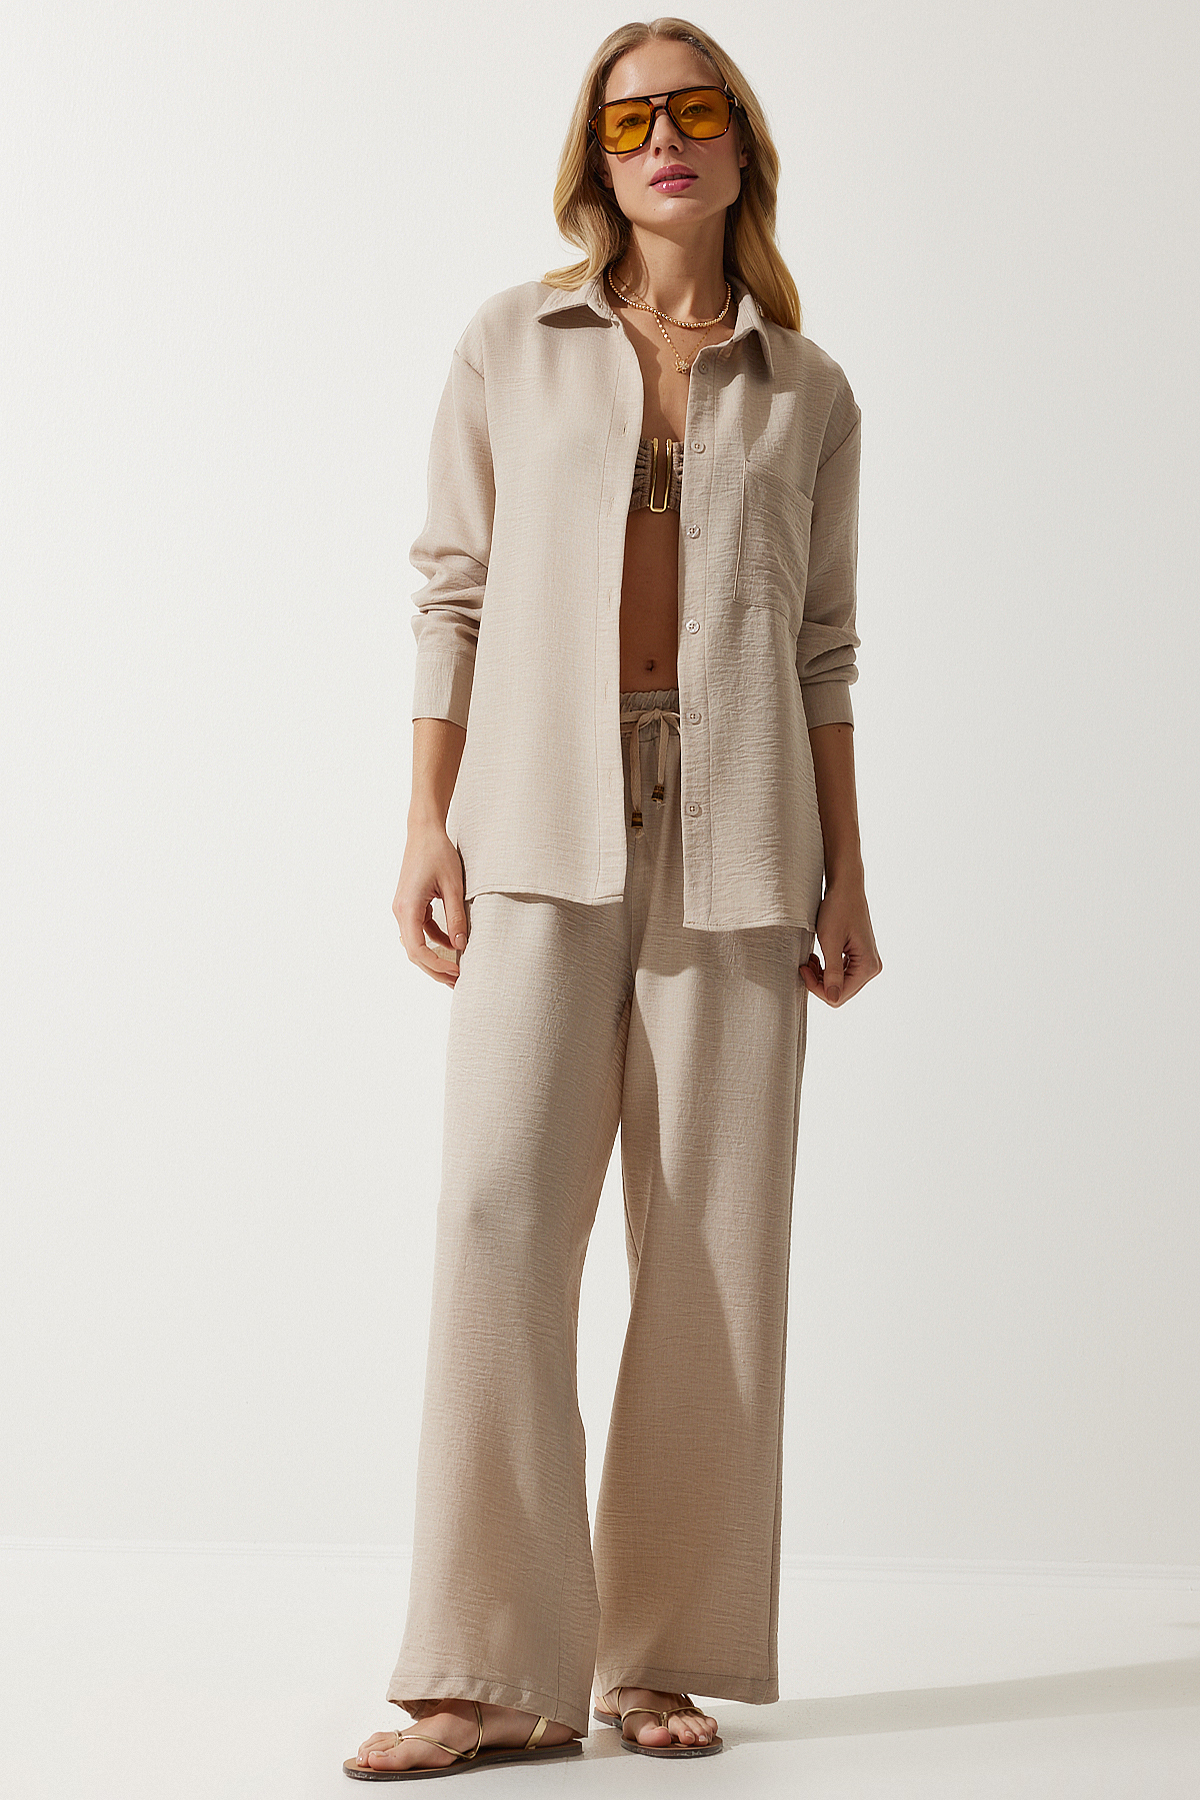 Happiness İstanbul Women's Beige Oversize Shirt Wide Trousers Suit